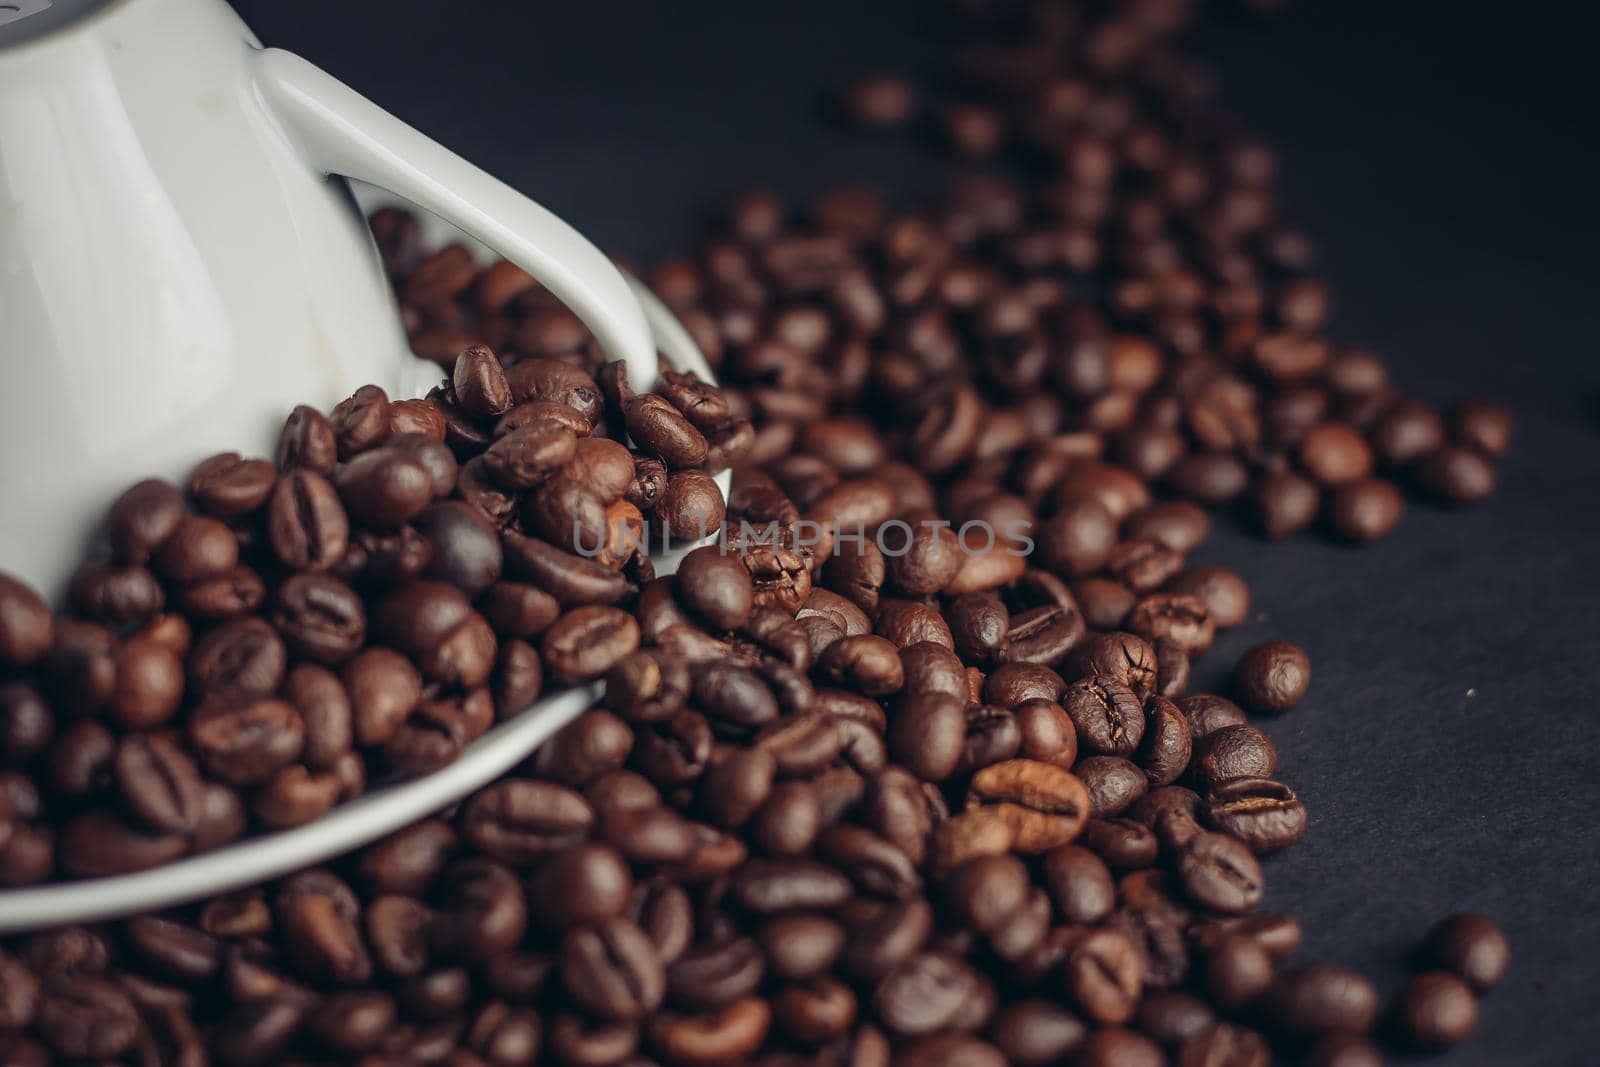 white cup and saucer and large coffee beans on a dark background macro photography by SHOTPRIME